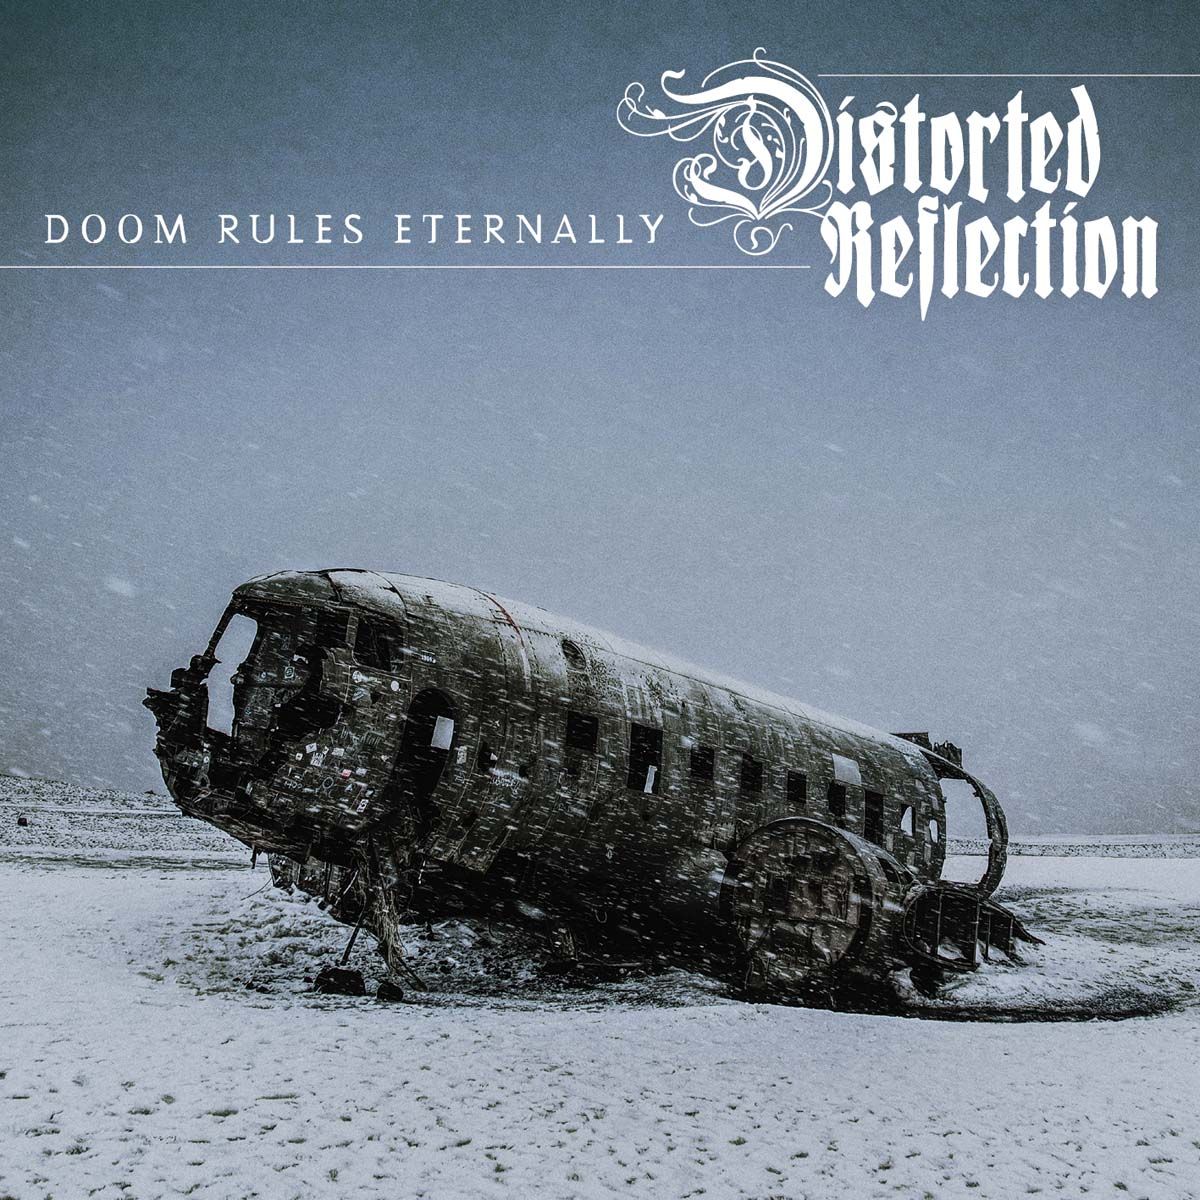 Distorted Reflection Doom Rules Eternally